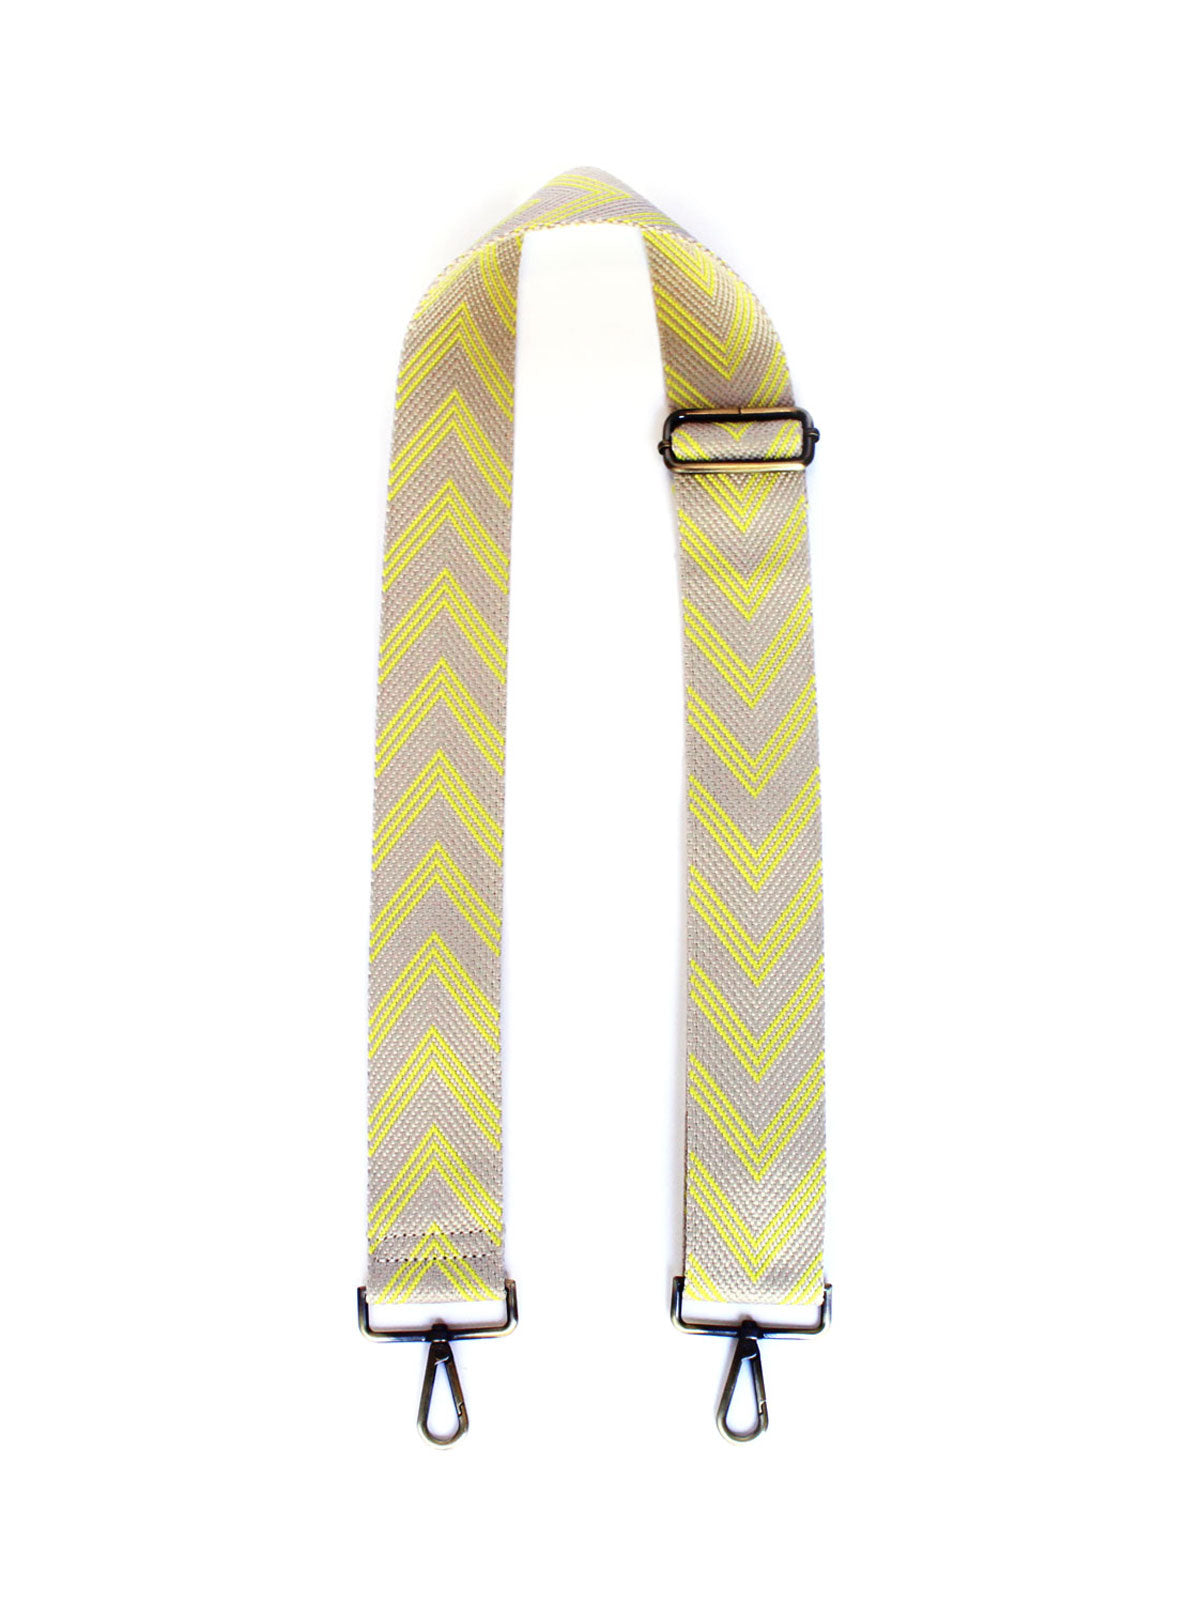 Ziggy Strap in Chartreuse